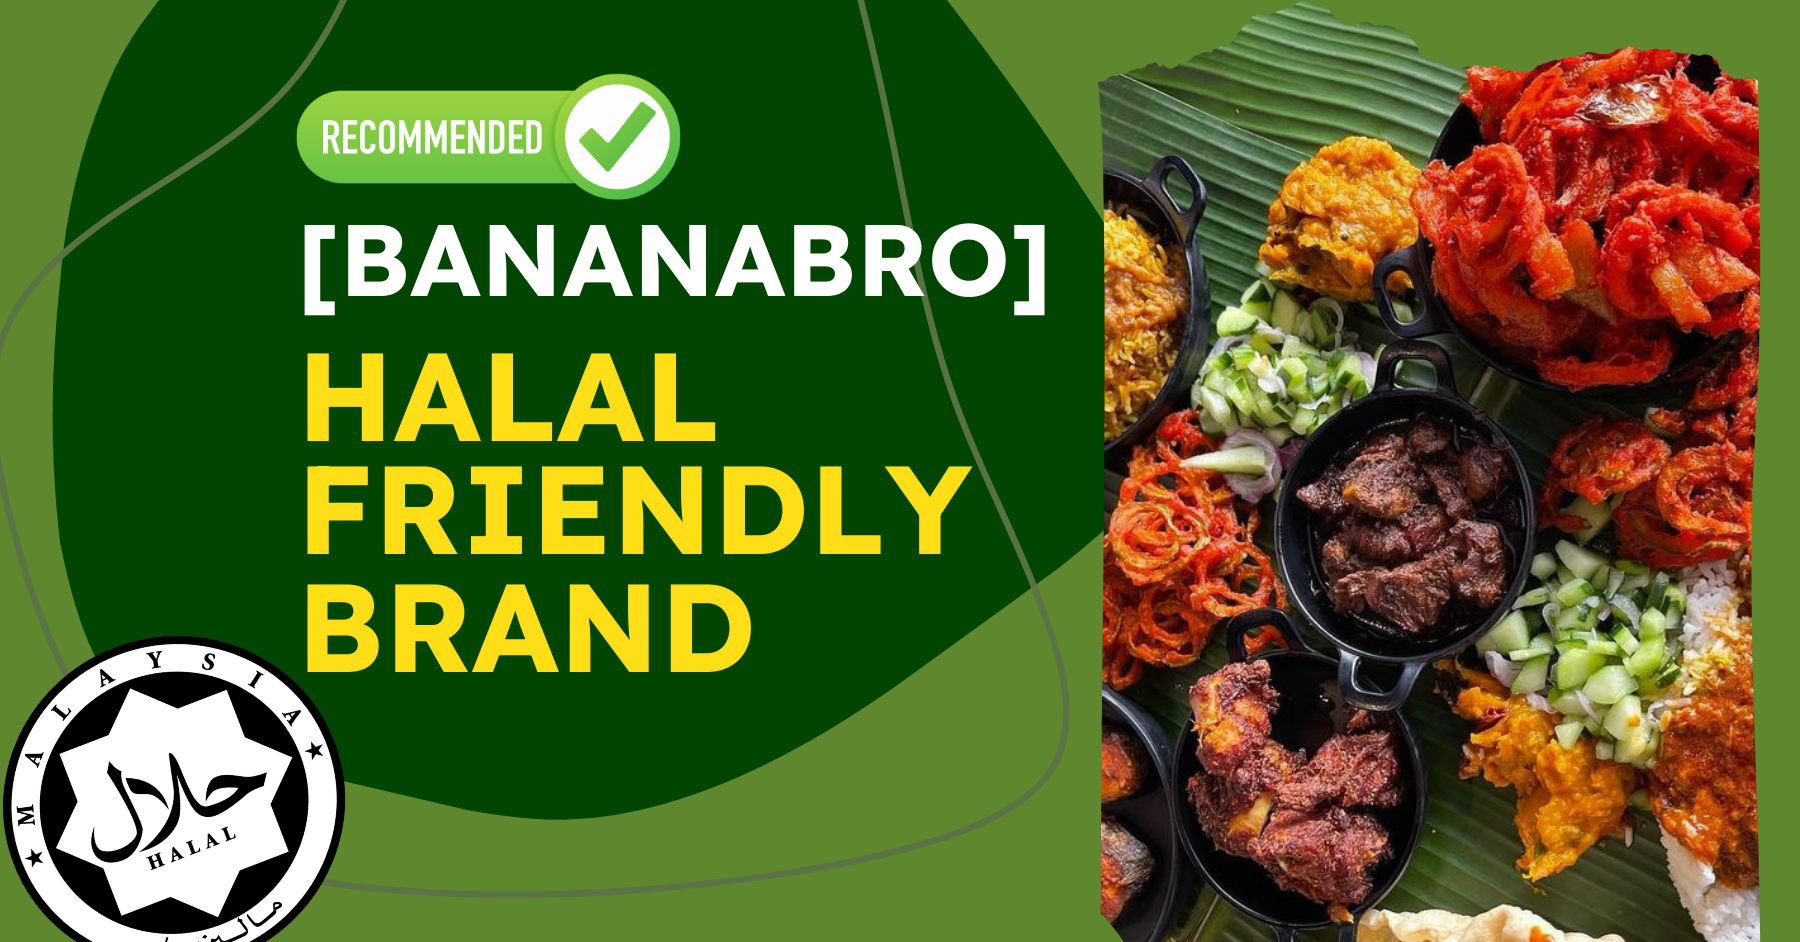 [BananaBro] Halal-friendly Brand Offering Authentic South Indian Food